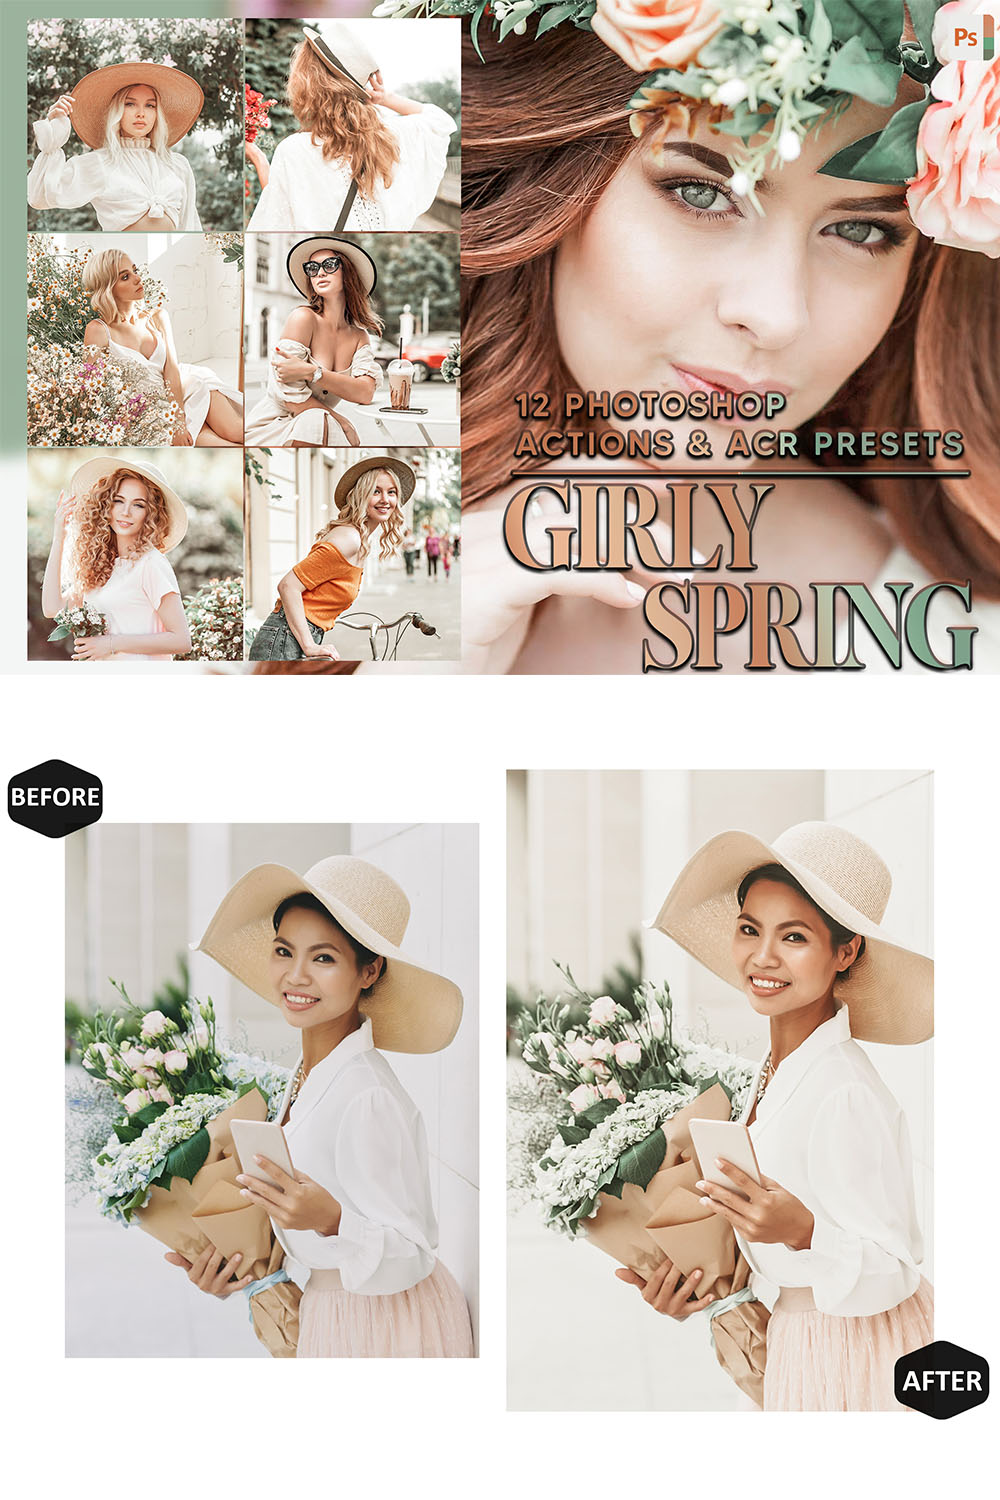 12 Photoshop Actions, Girly Spring Ps Action, Espresso ACR Preset, Bright Cream Ps Filter, Atn Portrait And Lifestyle Theme For Instagram, Blogger pinterest preview image.